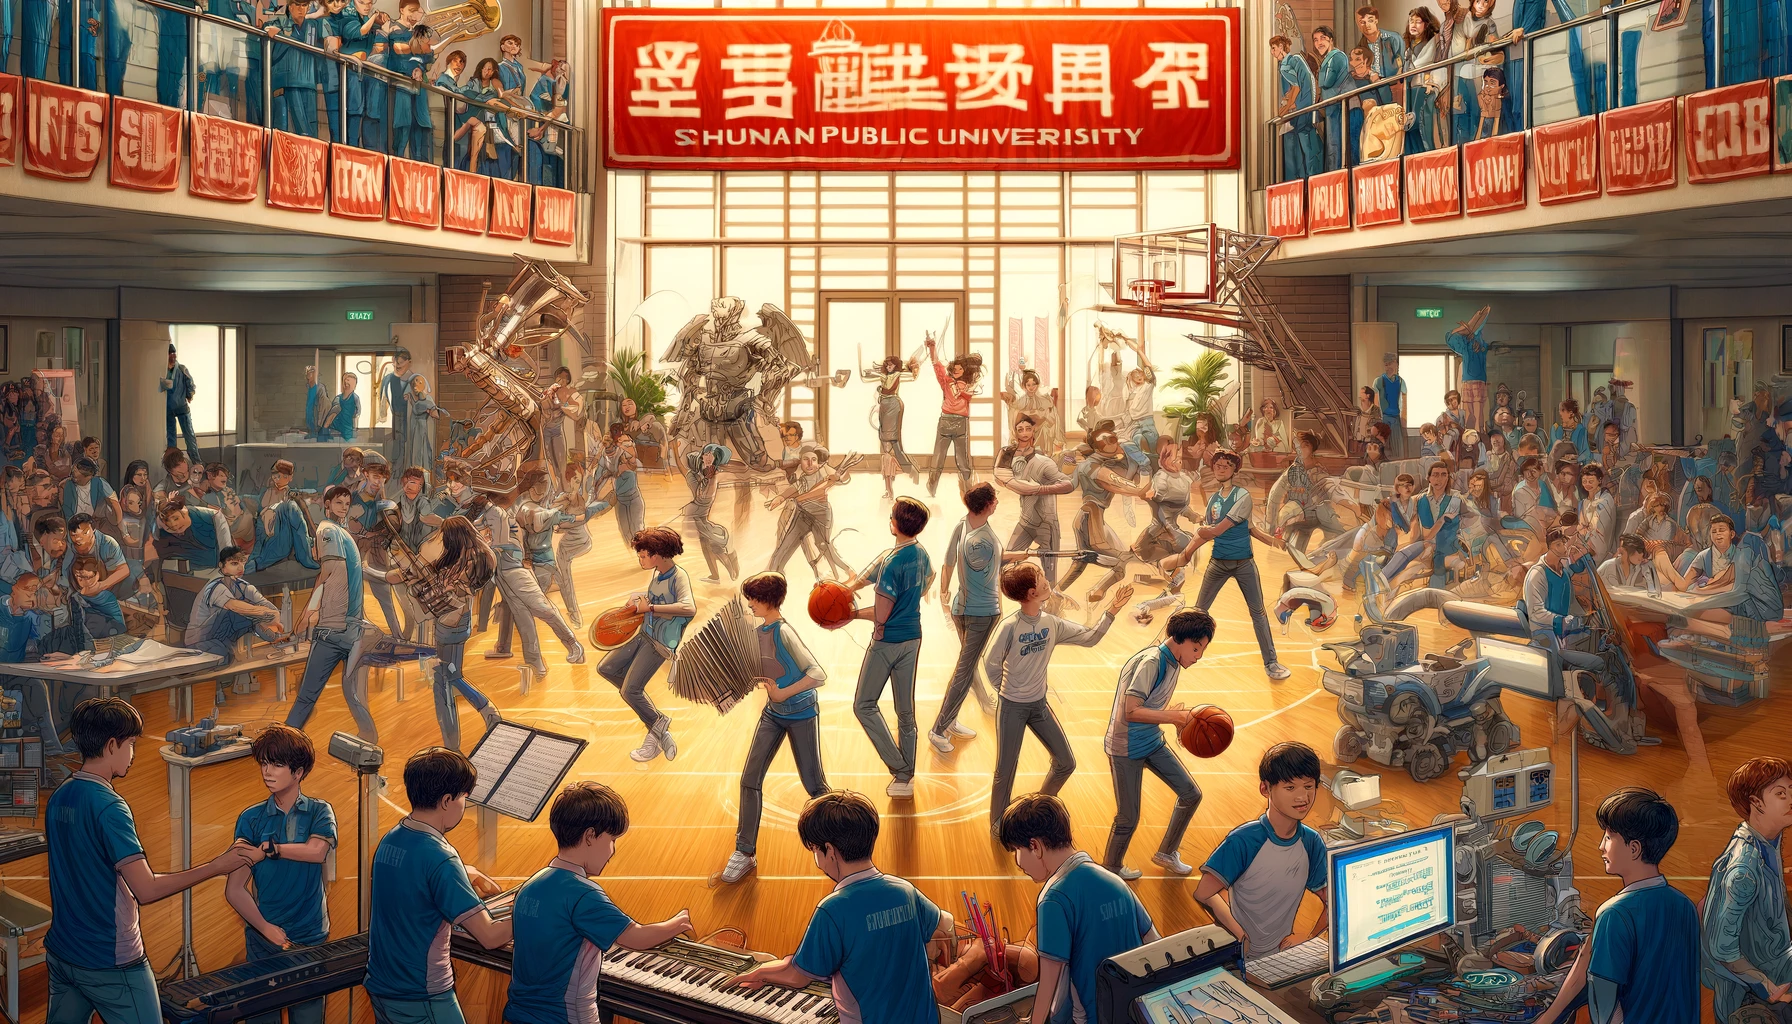 An energetic scene at Shunan Public University focusing on students engaged in various club activities. The image captures students participating in a range of extracurricular activities such as a music band practice, a robotics club meeting, and sports teams in action, like basketball and soccer. The environment is lively and filled with enthusiasm, showcasing the students' passion and teamwork. The school's spirit is highlighted by the word 'SHUNAN' displayed in bold English letters in a prominent part of the scene, reflecting the school's vibrant community spirit.